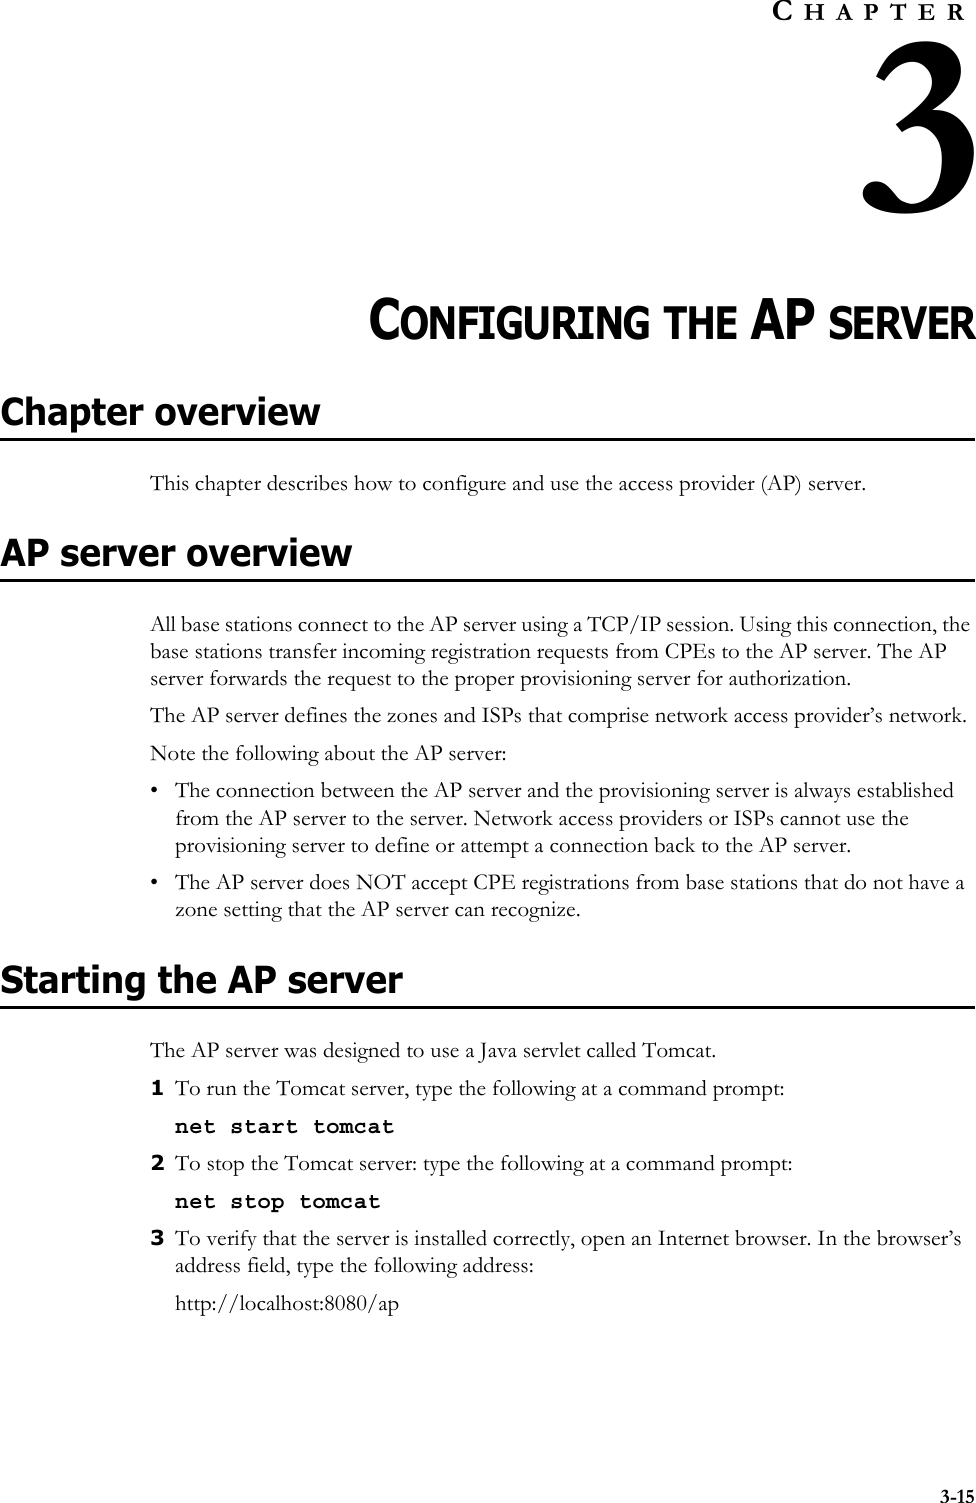 3-15CHAPTER3CHAPTER 3CONFIGURING THE AP SERVERChapter overviewThis chapter describes how to configure and use the access provider (AP) server. AP server overviewAll base stations connect to the AP server using a TCP/IP session. Using this connection, the base stations transfer incoming registration requests from CPEs to the AP server. The AP server forwards the request to the proper provisioning server for authorization. The AP server defines the zones and ISPs that comprise network access provider’s network. Note the following about the AP server:• The connection between the AP server and the provisioning server is always established from the AP server to the server. Network access providers or ISPs cannot use the provisioning server to define or attempt a connection back to the AP server. • The AP server does NOT accept CPE registrations from base stations that do not have a zone setting that the AP server can recognize. Starting the AP serverThe AP server was designed to use a Java servlet called Tomcat.1To run the Tomcat server, type the following at a command prompt: net start tomcat2To stop the Tomcat server: type the following at a command prompt: net stop tomcat3To verify that the server is installed correctly, open an Internet browser. In the browser’s address field, type the following address:http://localhost:8080/ap